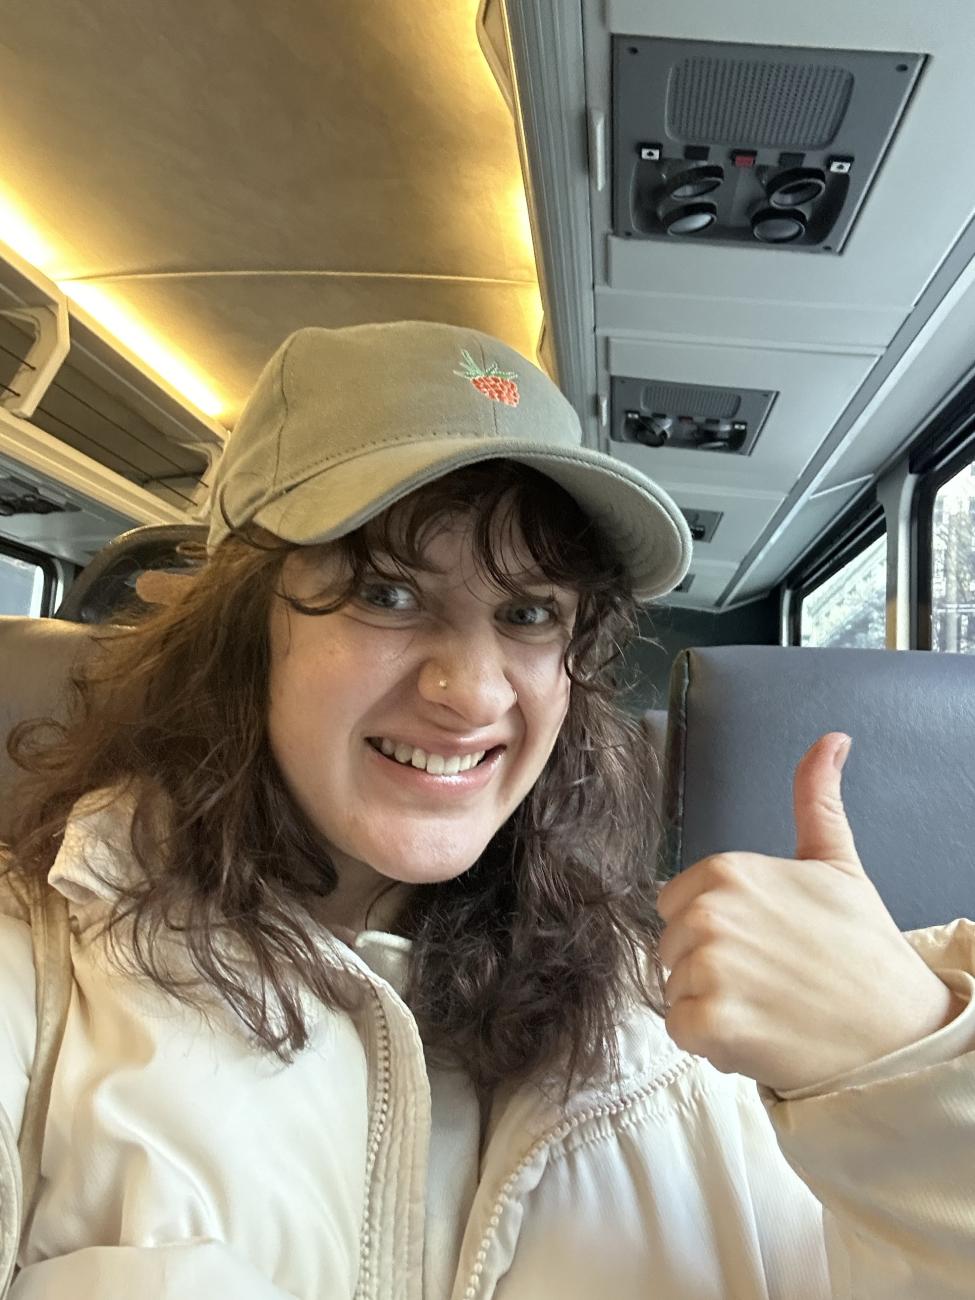 Hannah gives a thumbs up while taking a selfie on the Sounder train.